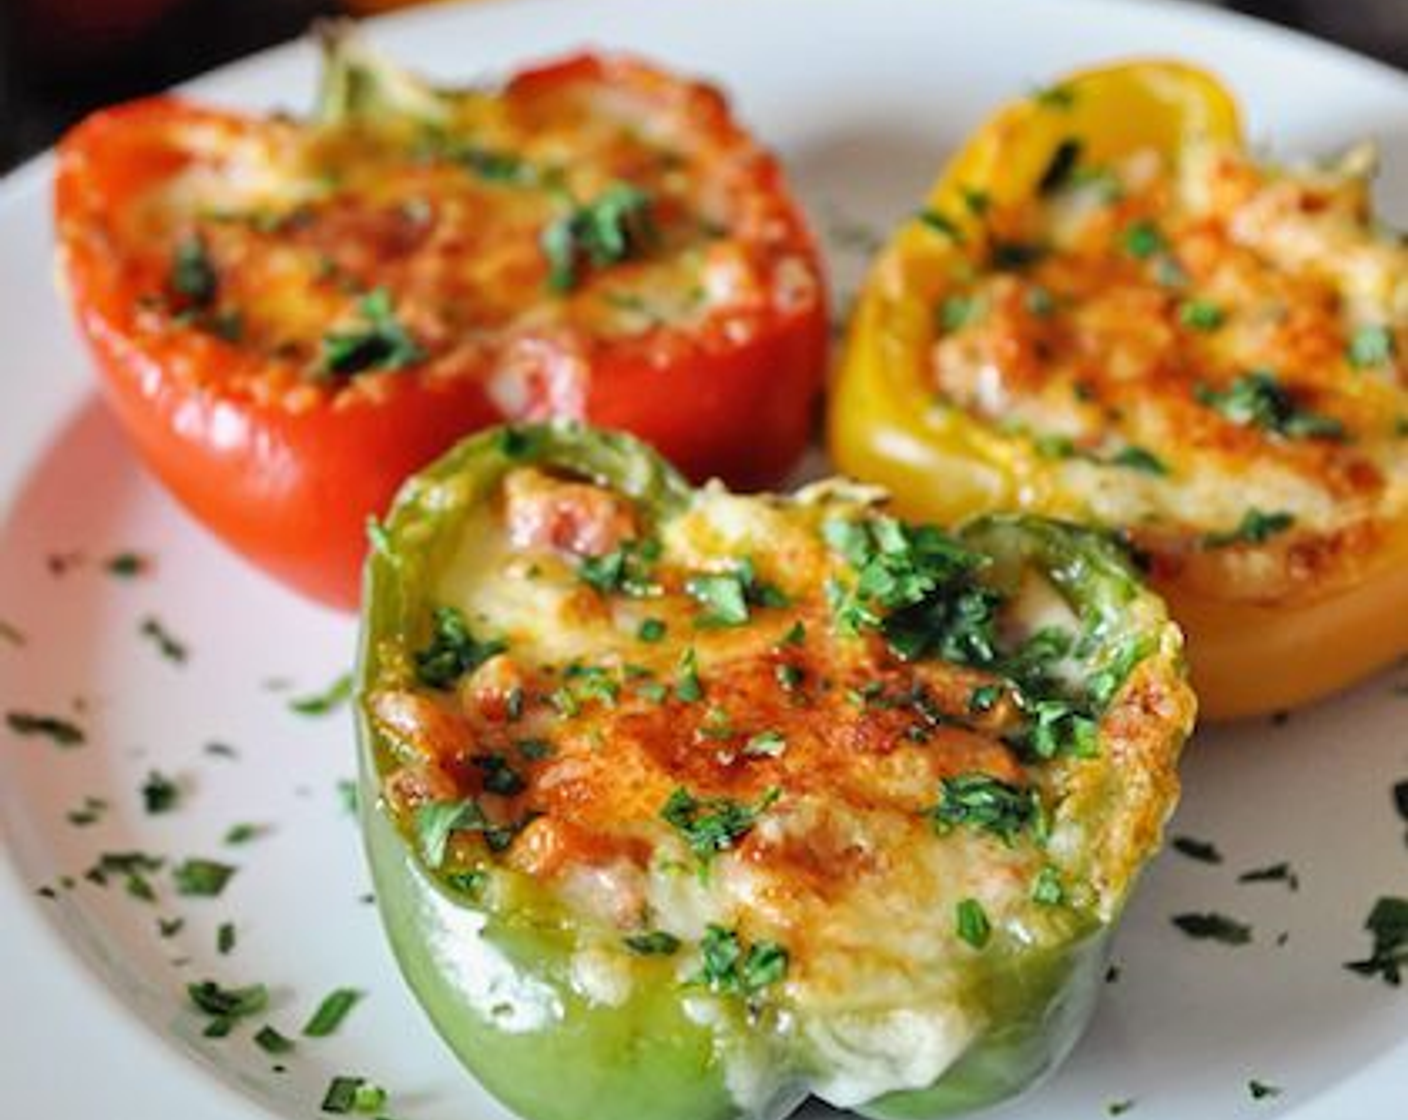 Stuffed Spanish Peppers with Tuna and Tomatoes